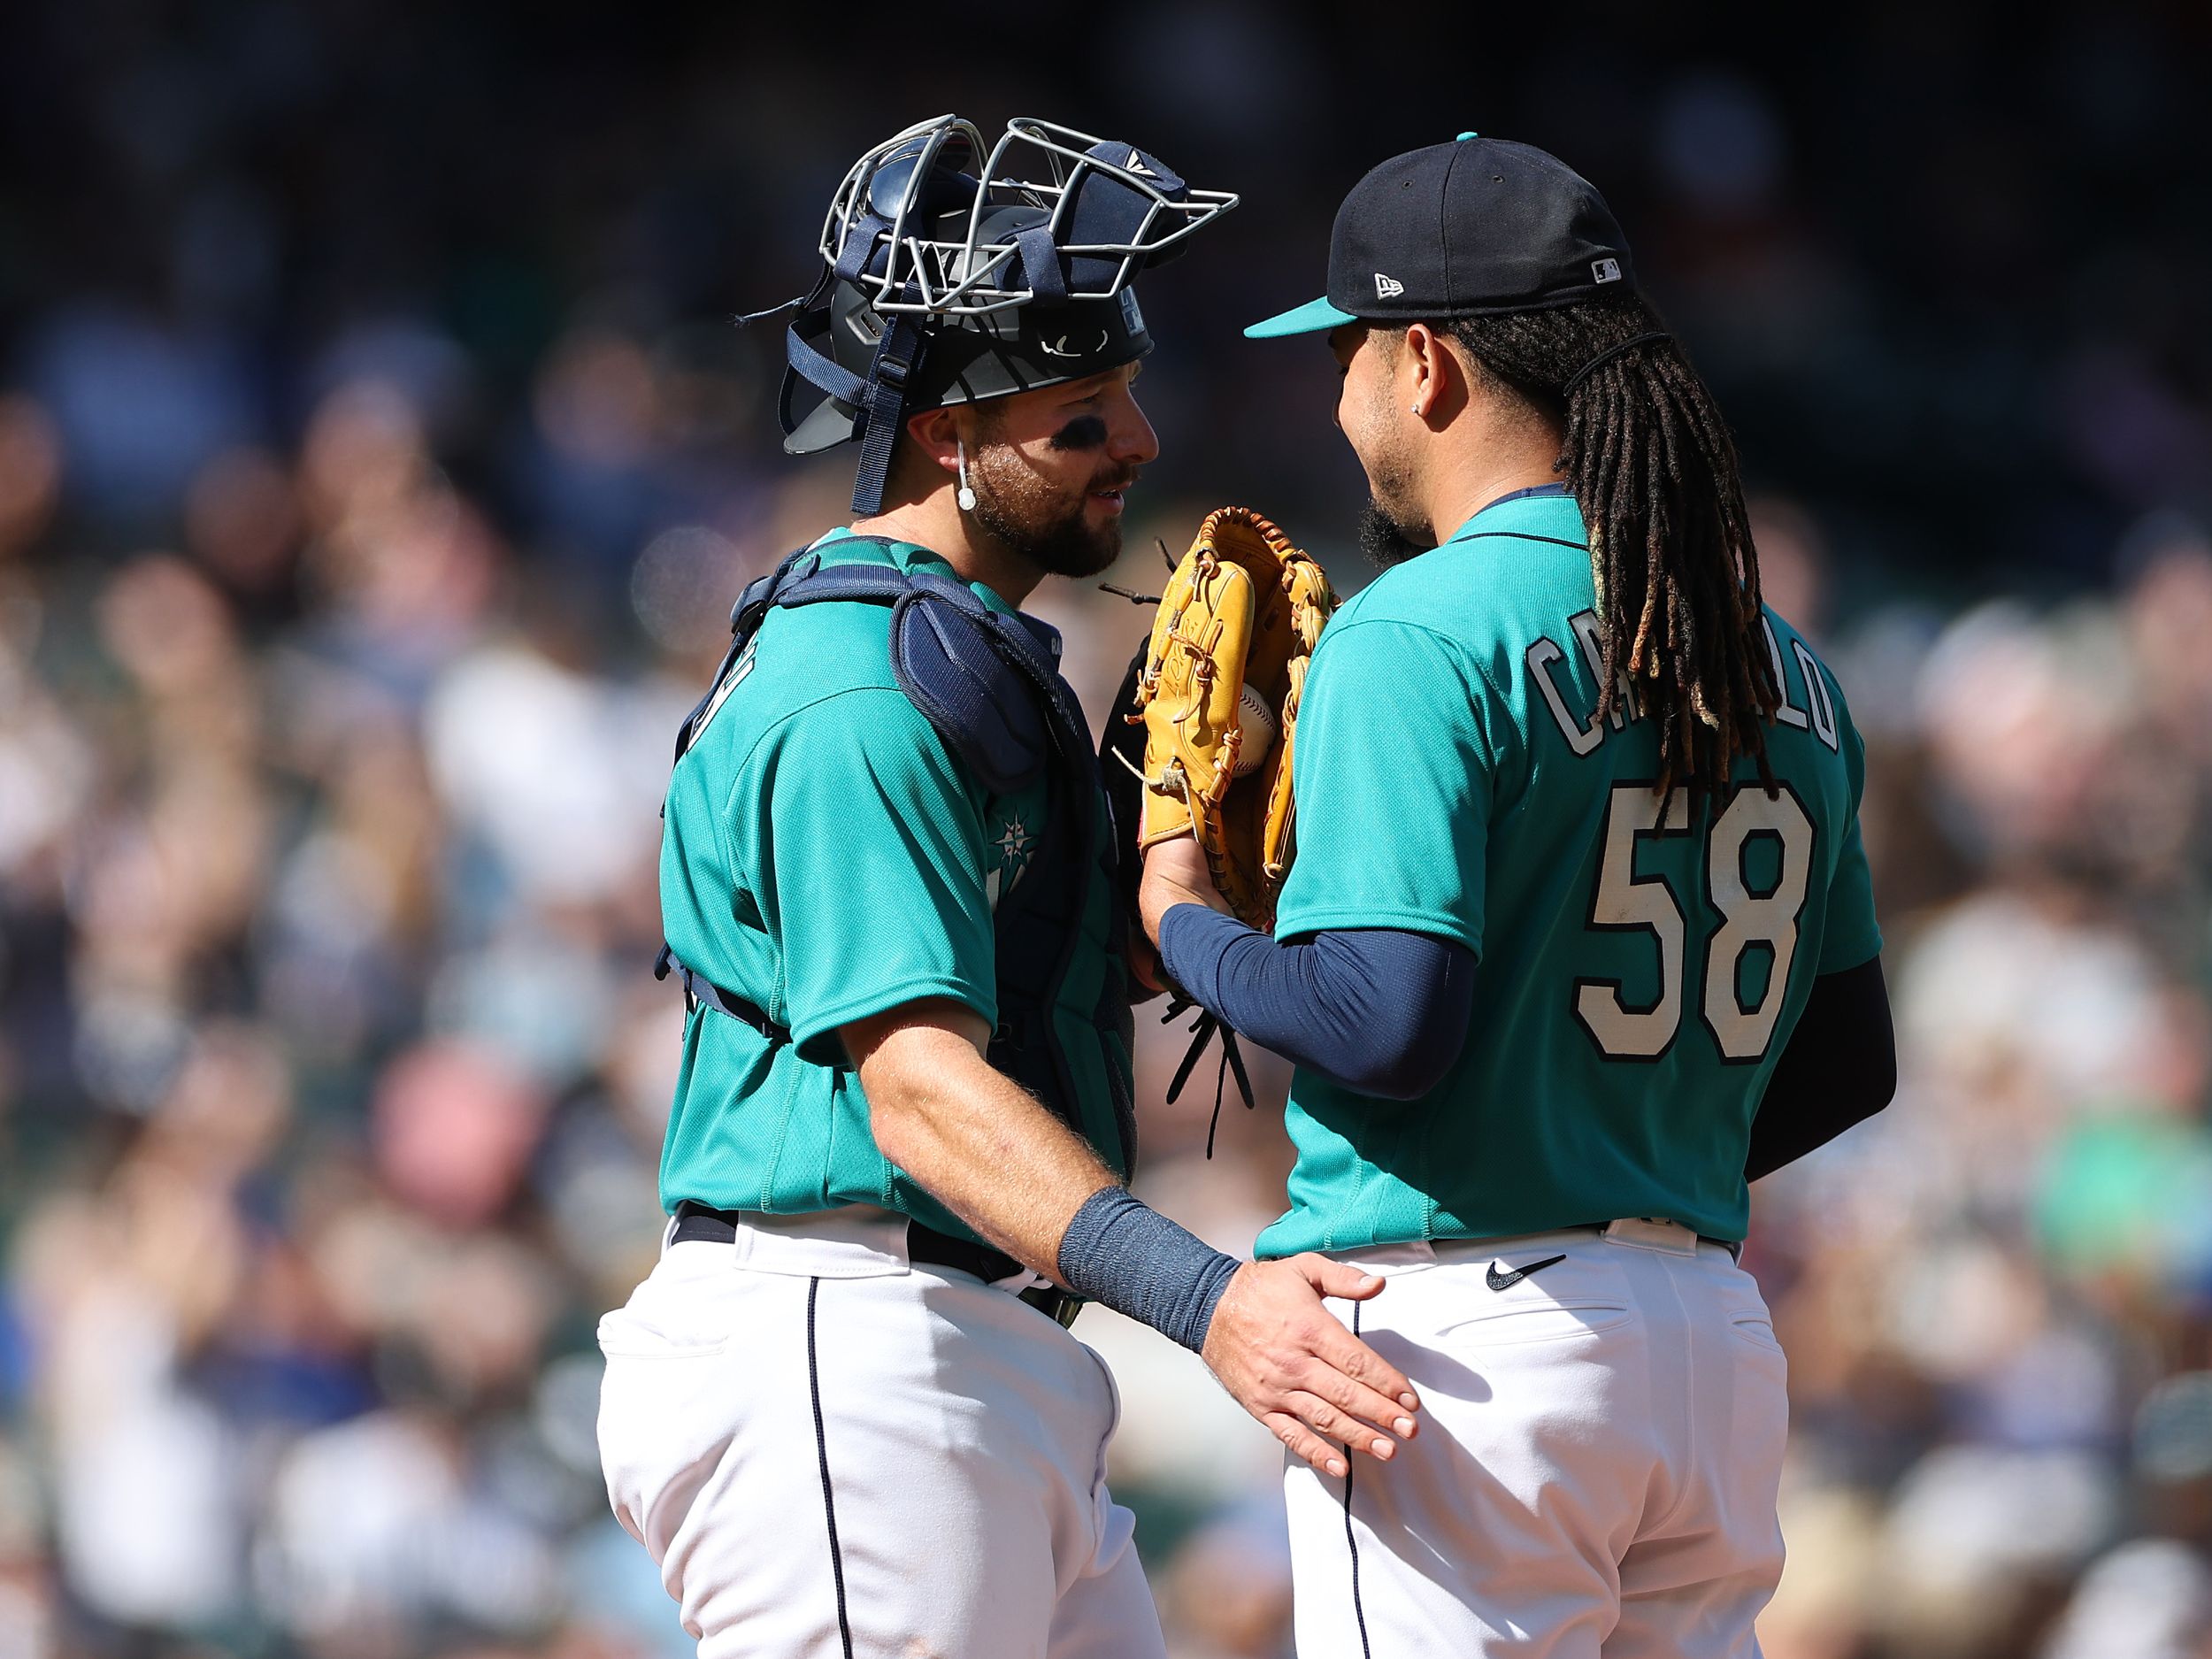 Cali MJ on X: How did the late 90s Seattle Mariners teams not get